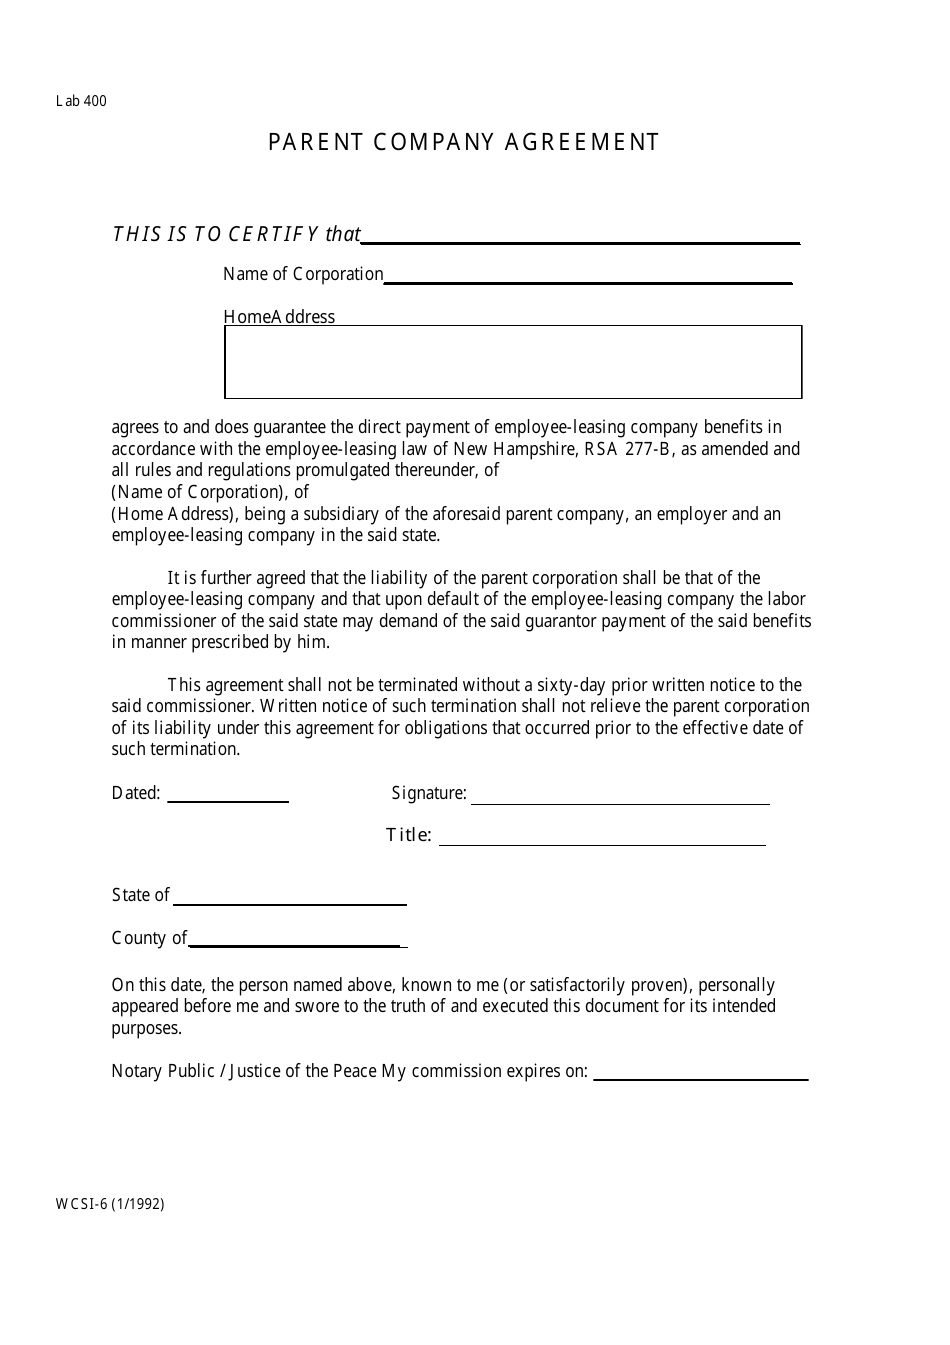 Form WCSI-6 Parent Company Agreement - New Hampshire, Page 1